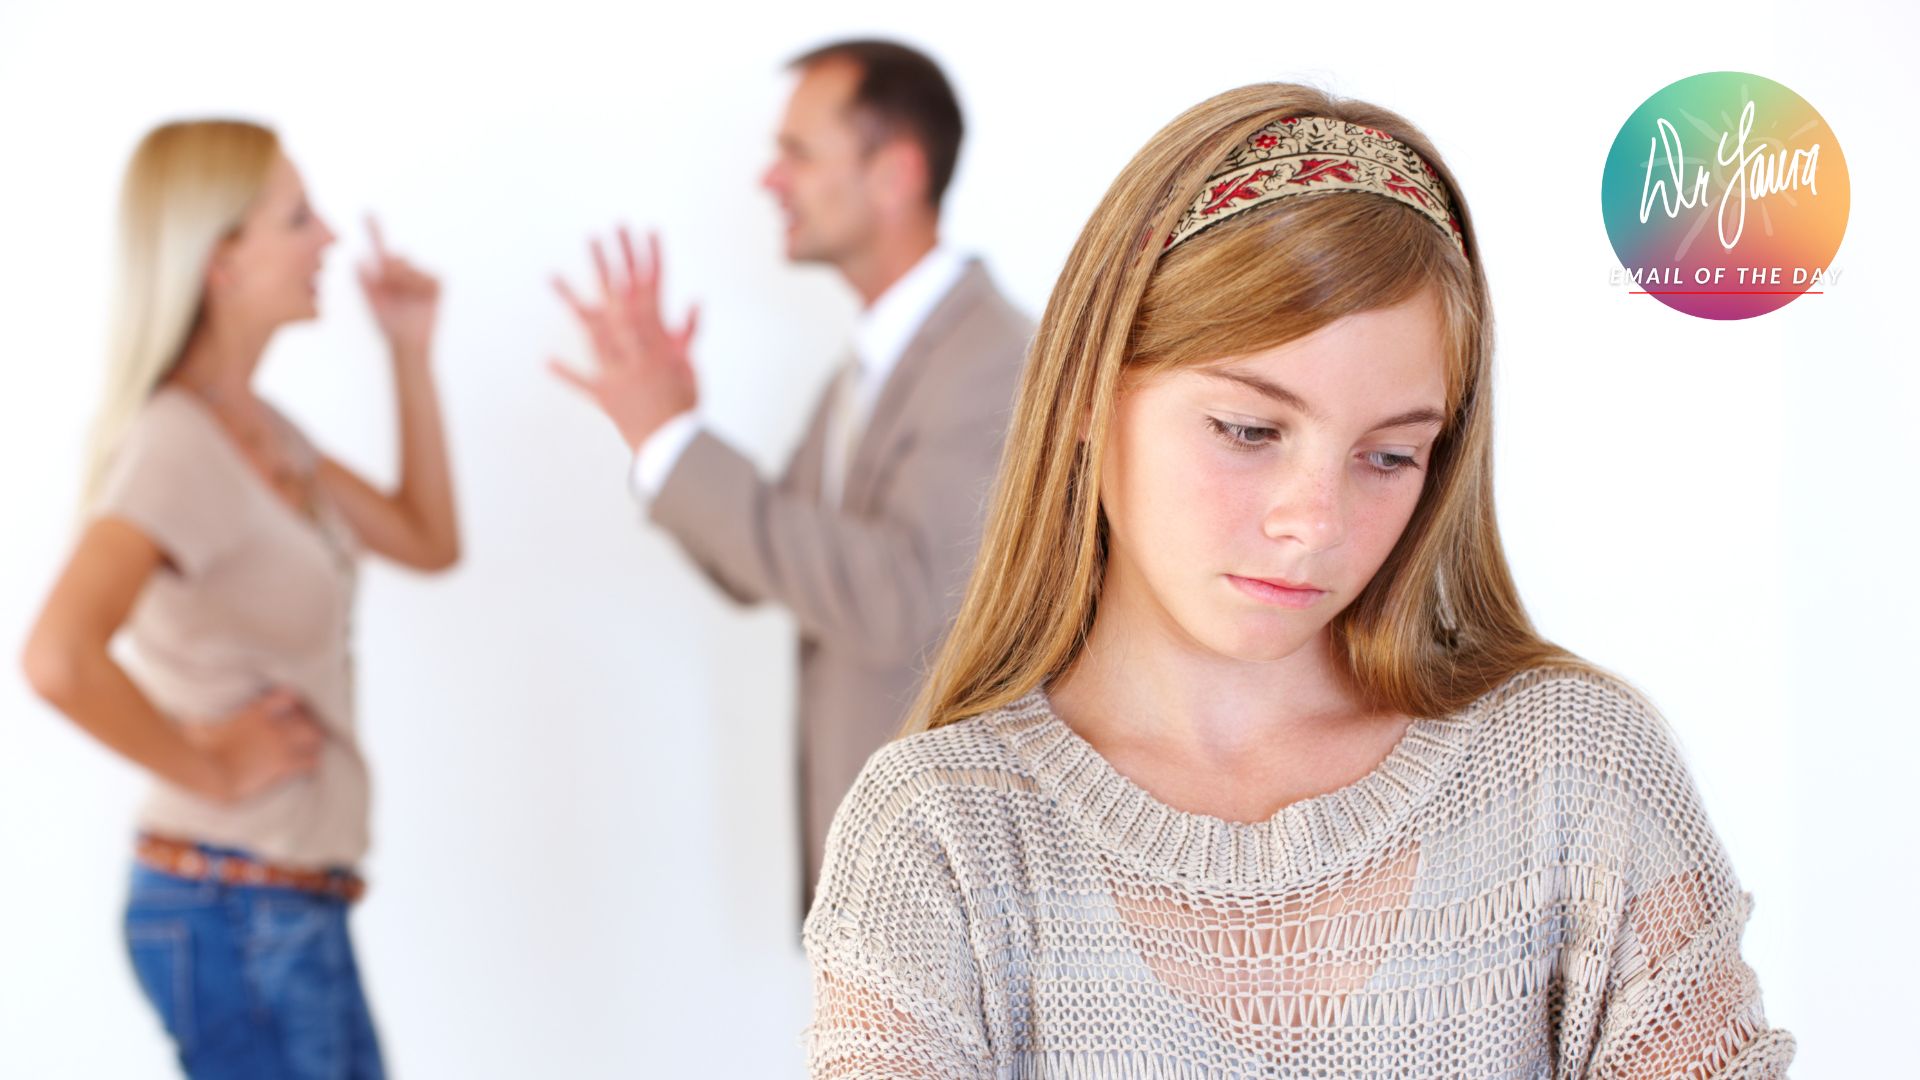 Email of the Day: I Felt Powerless After My Parents Divorced